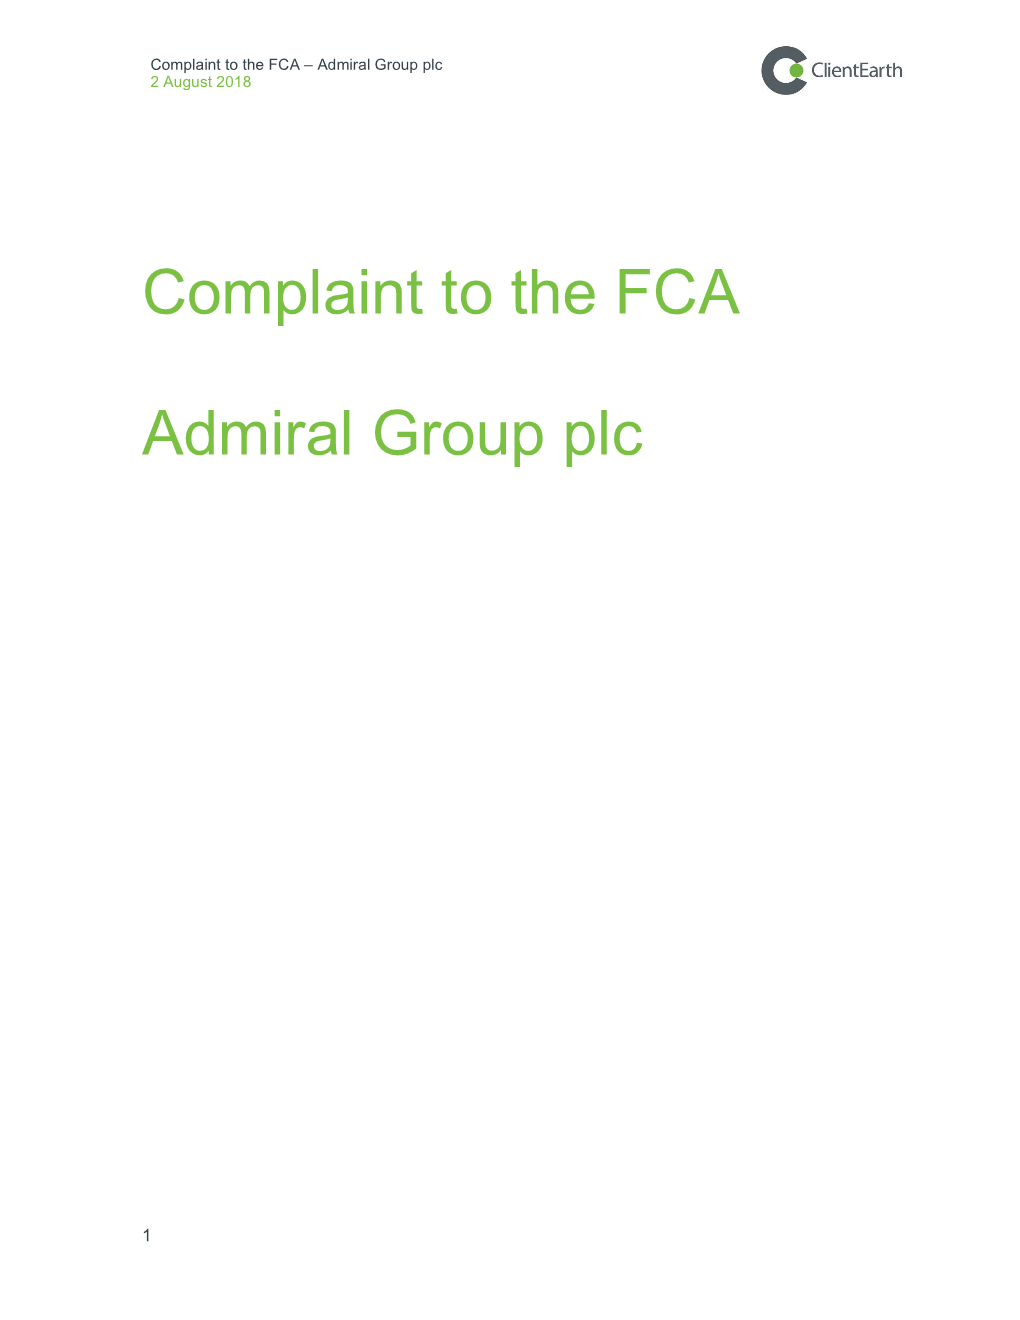 Complaint to the FCA Admiral Group